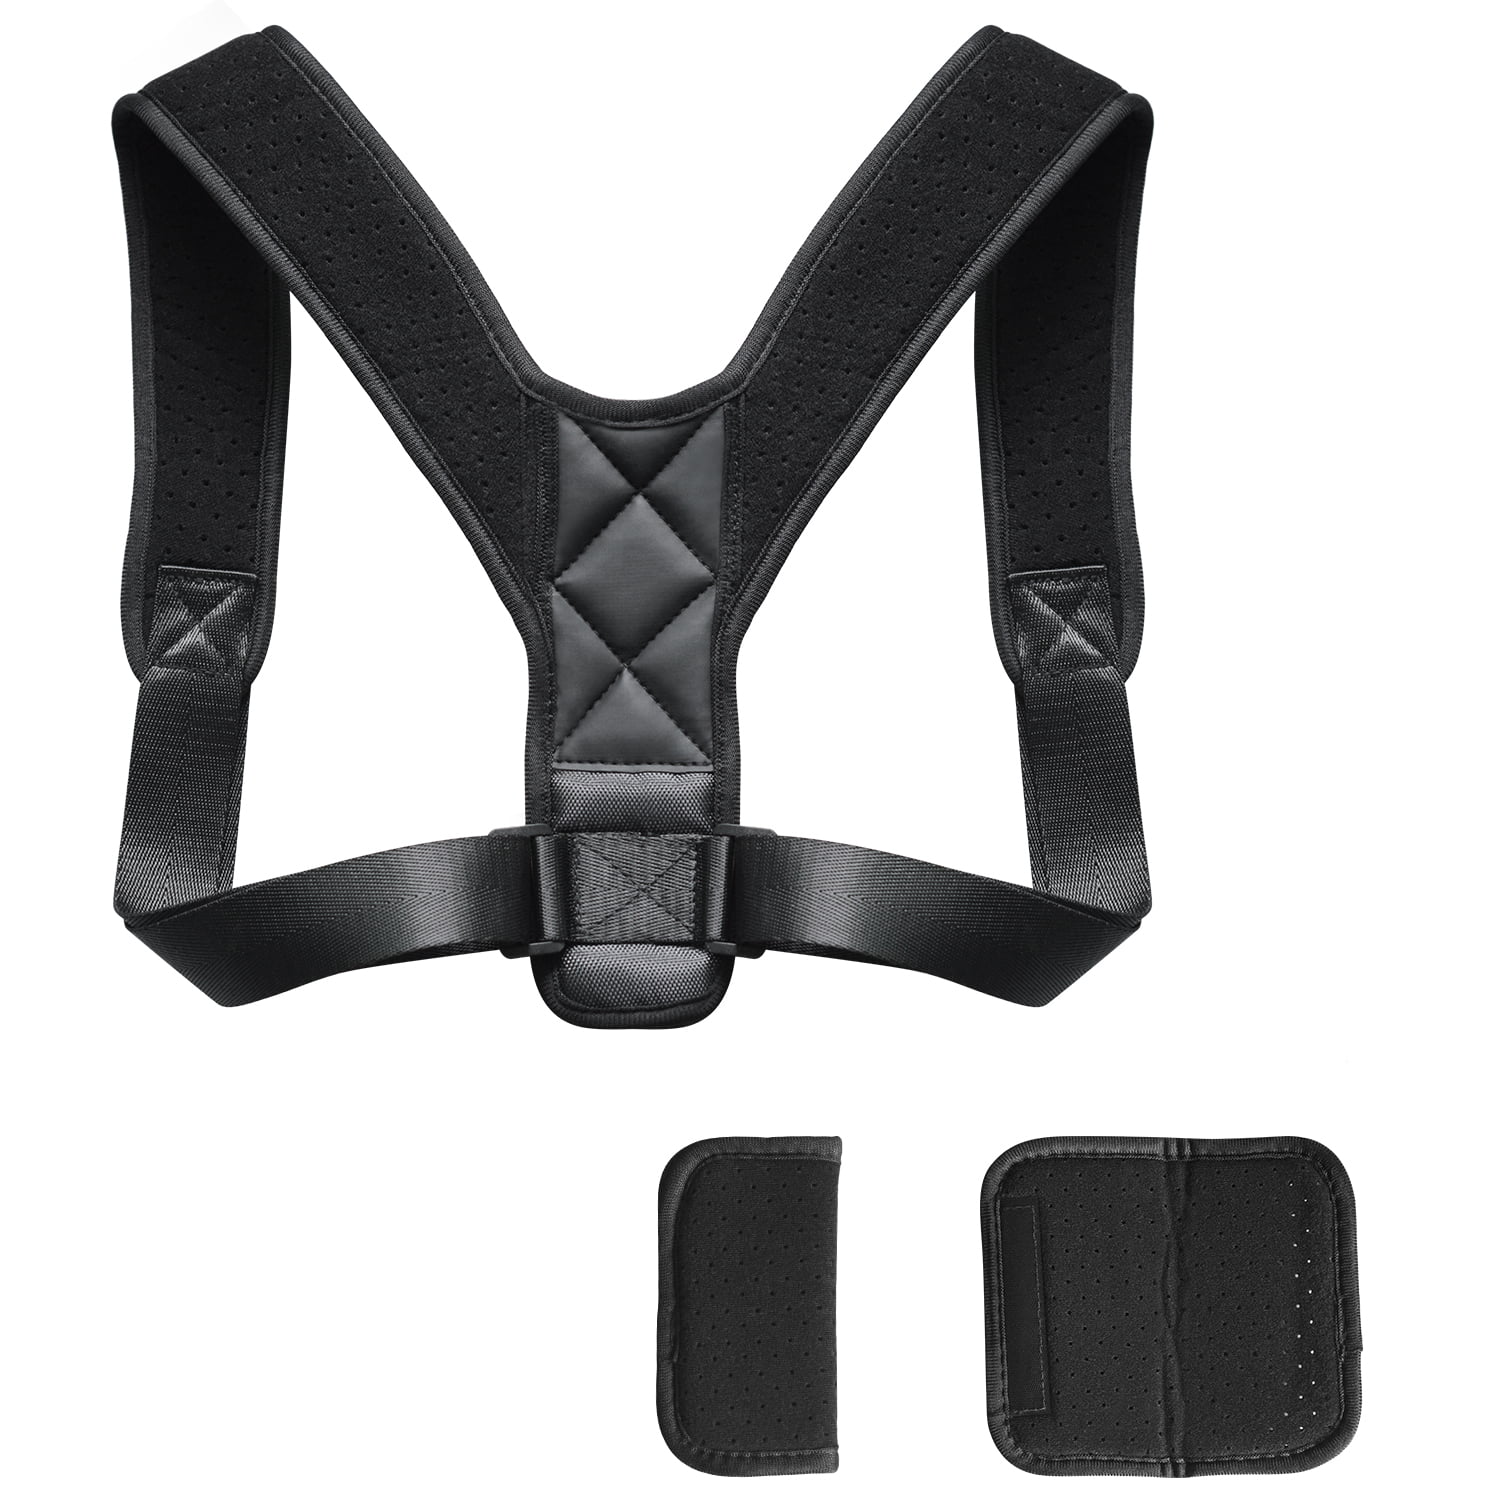 Franklin Sports Lower Back Brace - Adjustable Back Support Stabilizer -  Comfortable Lumbar Support, Pain Relief + Compression - One Size